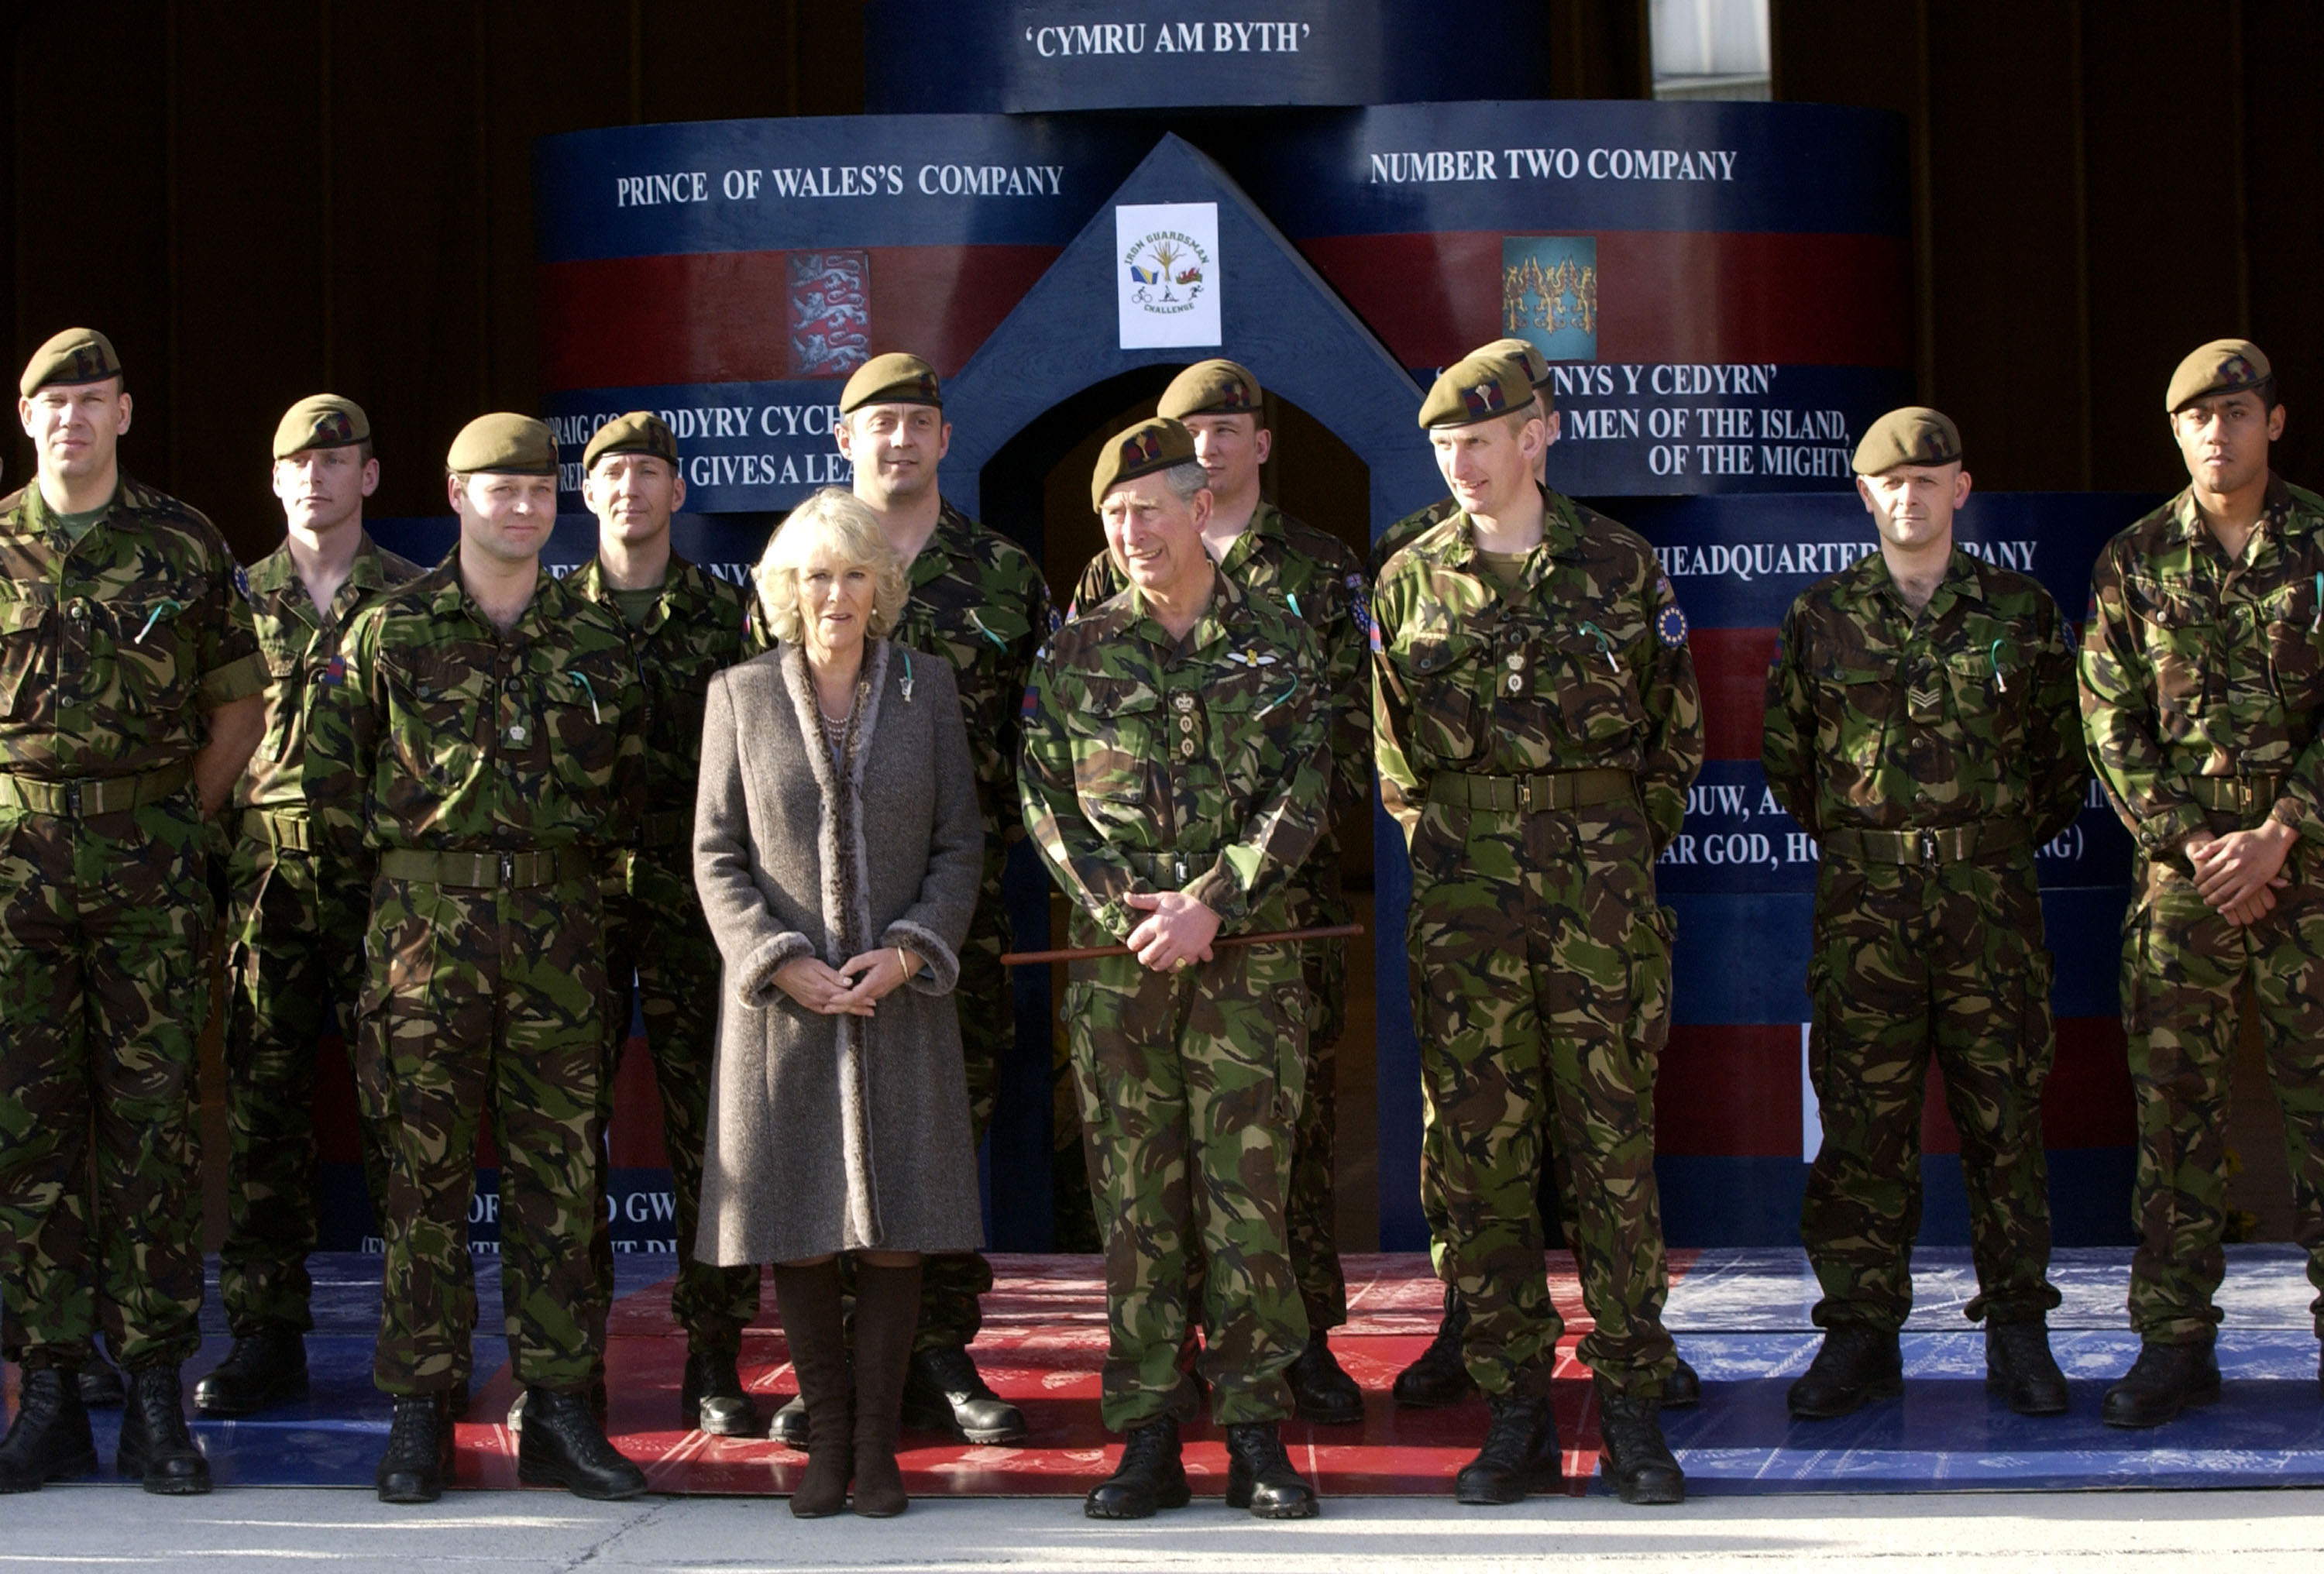 Queen Camilla and King Charles III visiting members of the 1st Battalion Welsh Guards on peacekeeping duties in Banja Luka, Bosnia on March 1, 2007 | Source: Getty Images